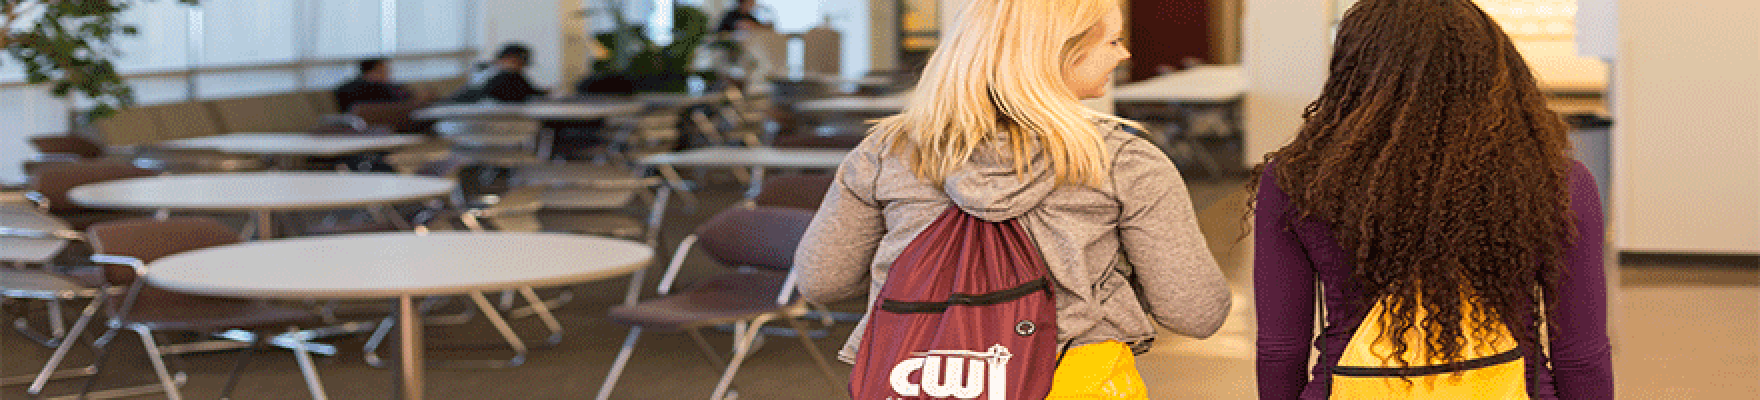 Two female students with CWI backpacks walking through common area with tables in background.